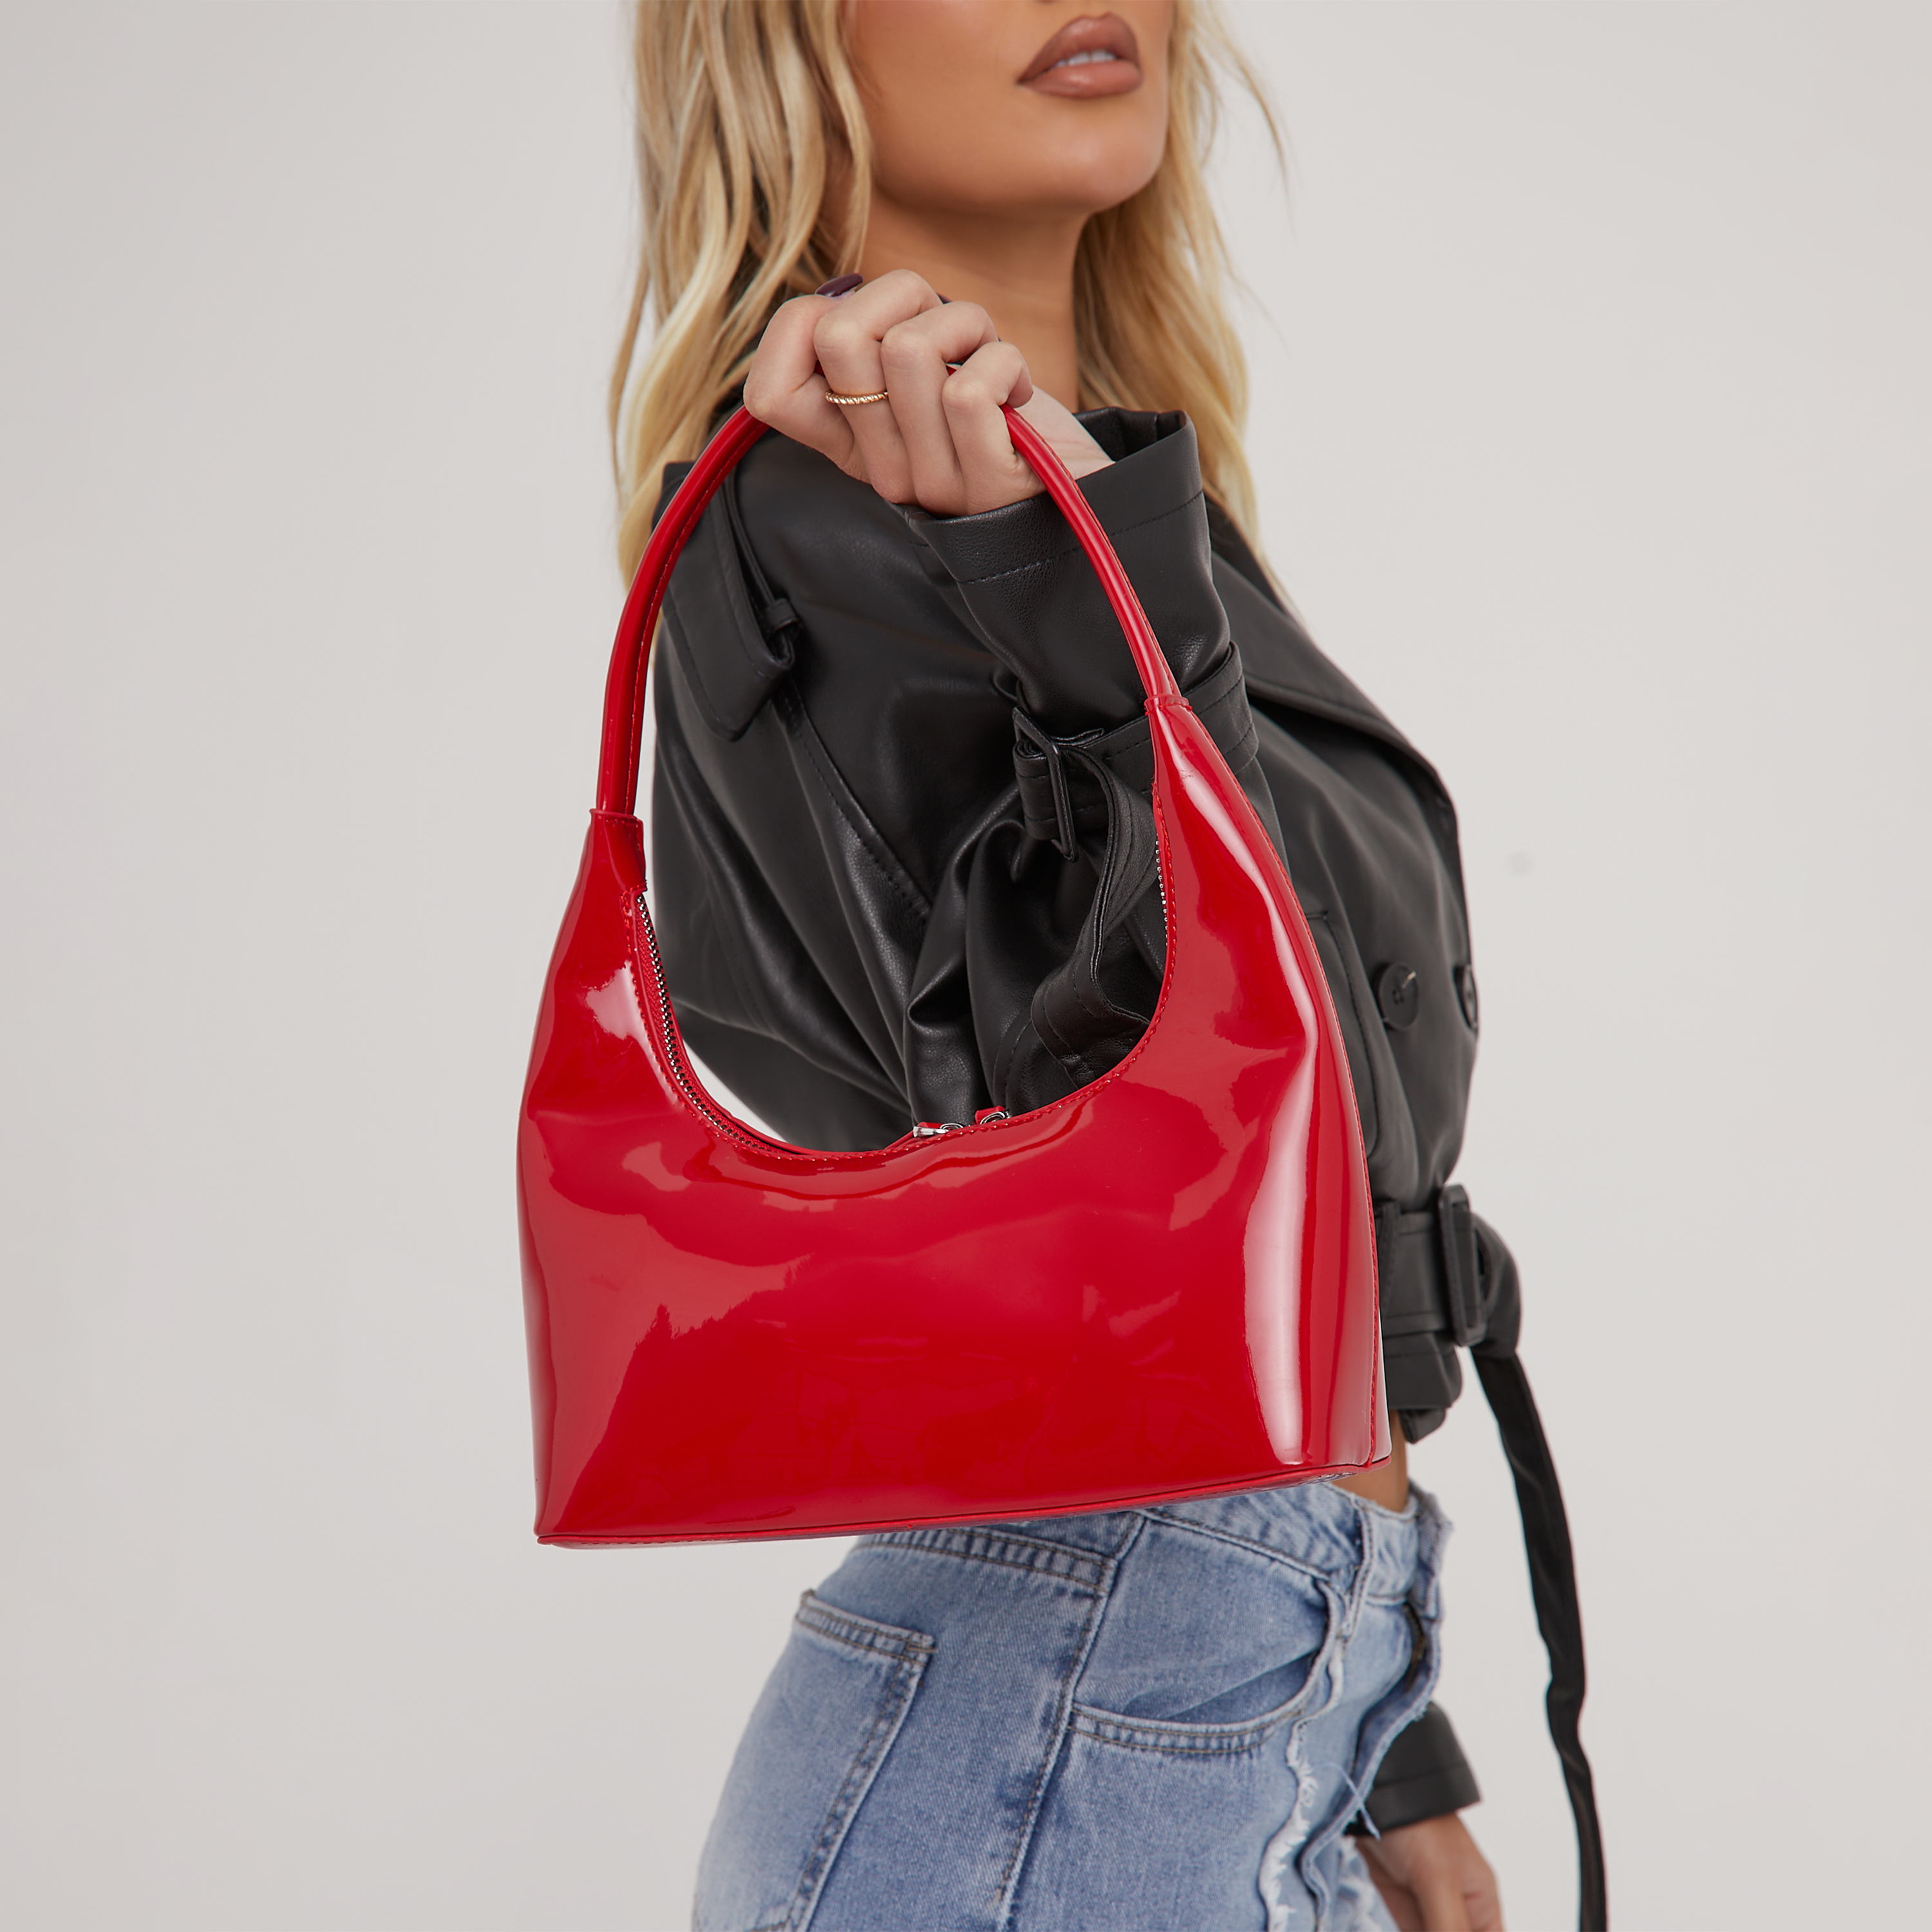 Hibiscus Shaped Shoulder Bag In Red Patent